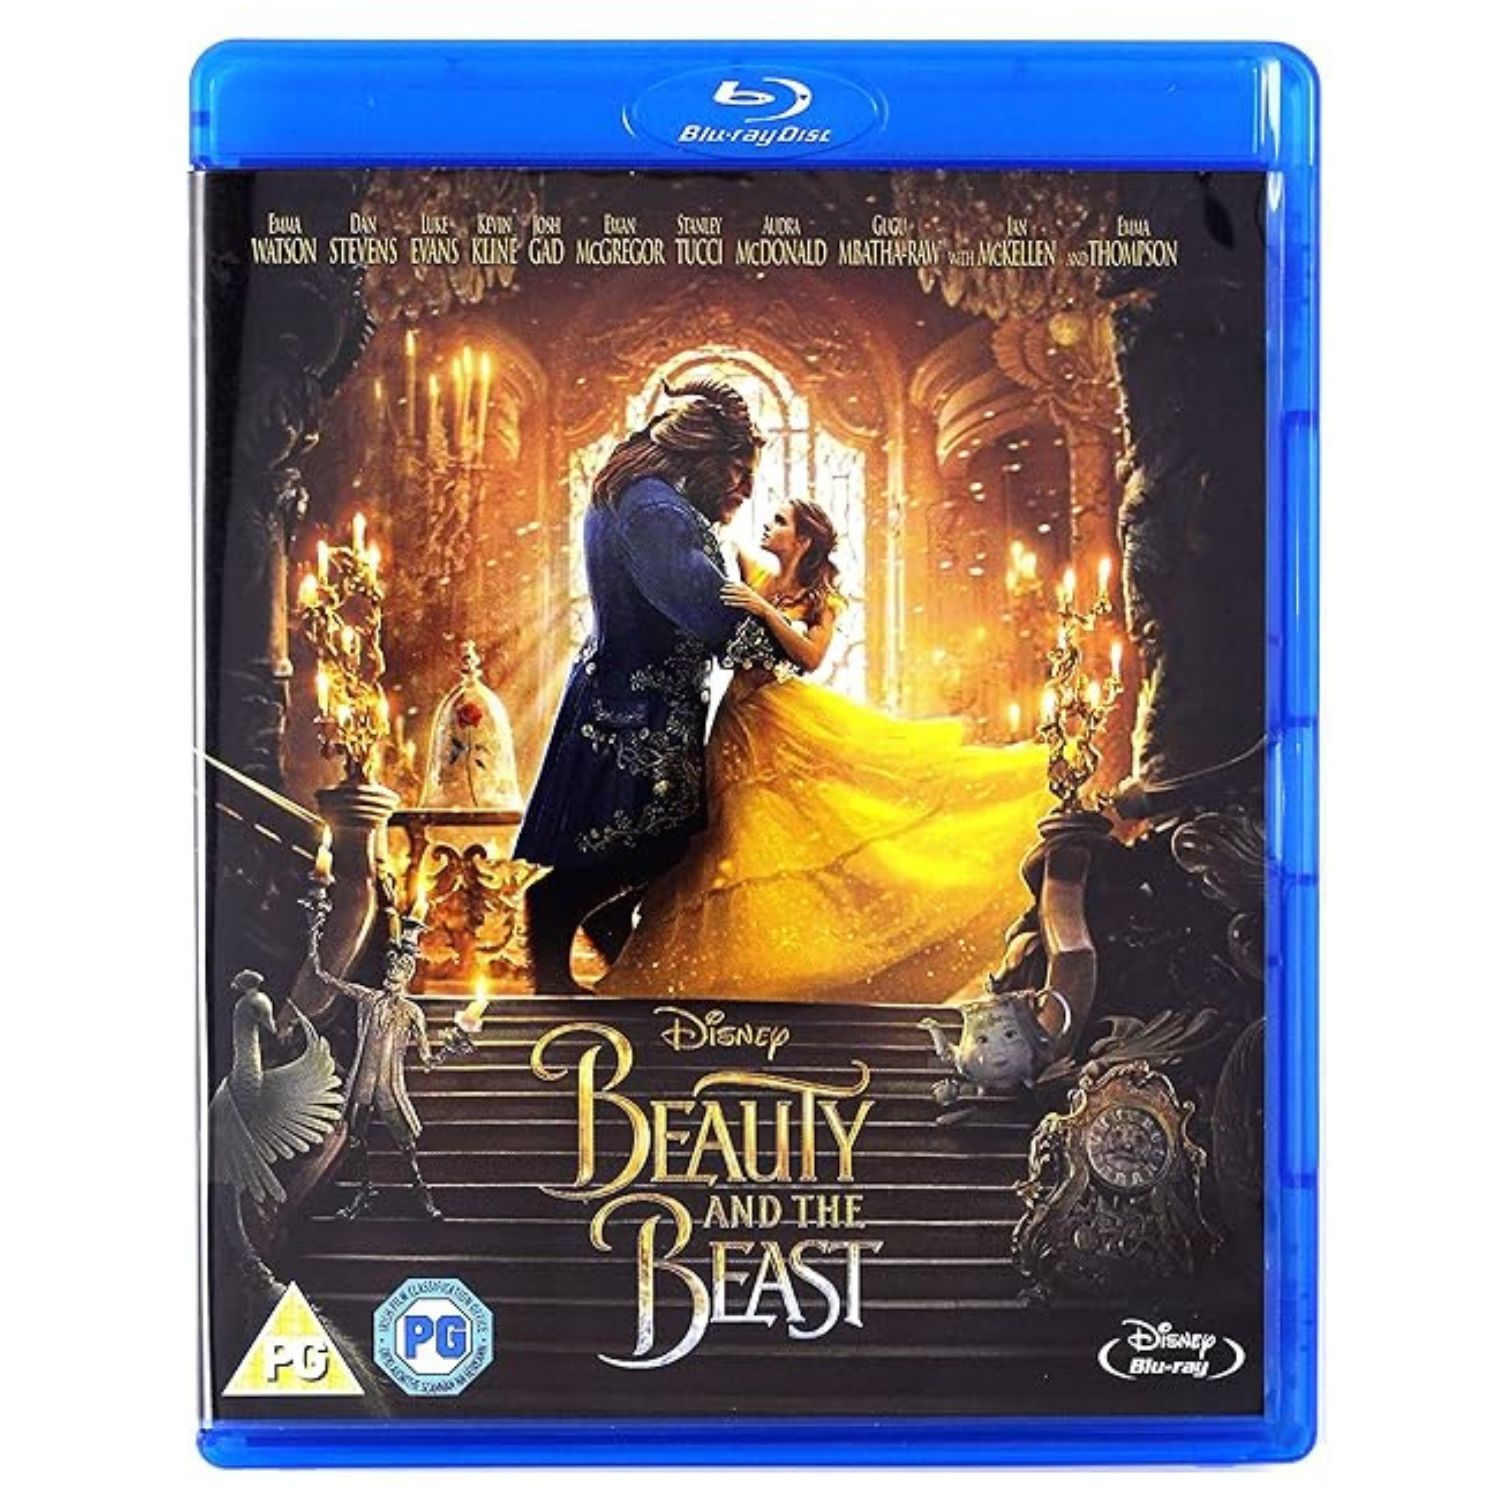 Beauty and the Beast Blu-ray cover